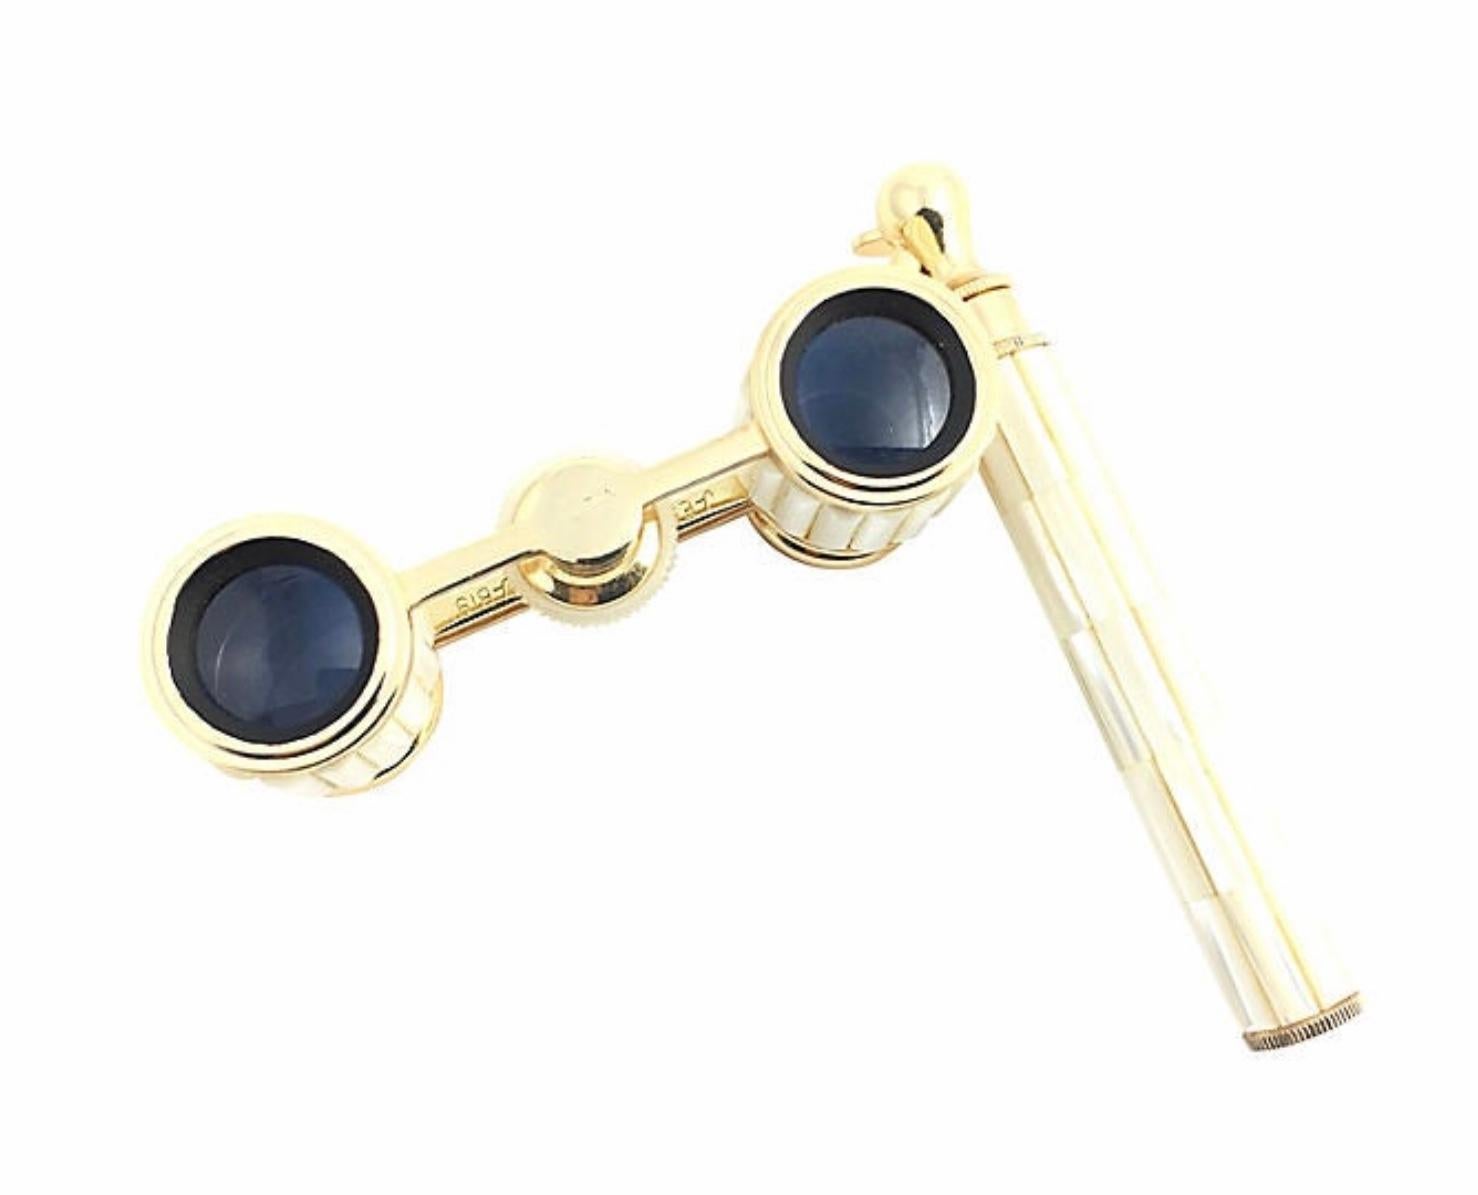 Mother of pearl opera glasses by Mignon in excellent condition. The body of the glasses as well as the telescopic handle are inlaid with real mother of pearl pieces adorned with gold accents. The magnification is 2.5X. Hand-held with “lock in place”